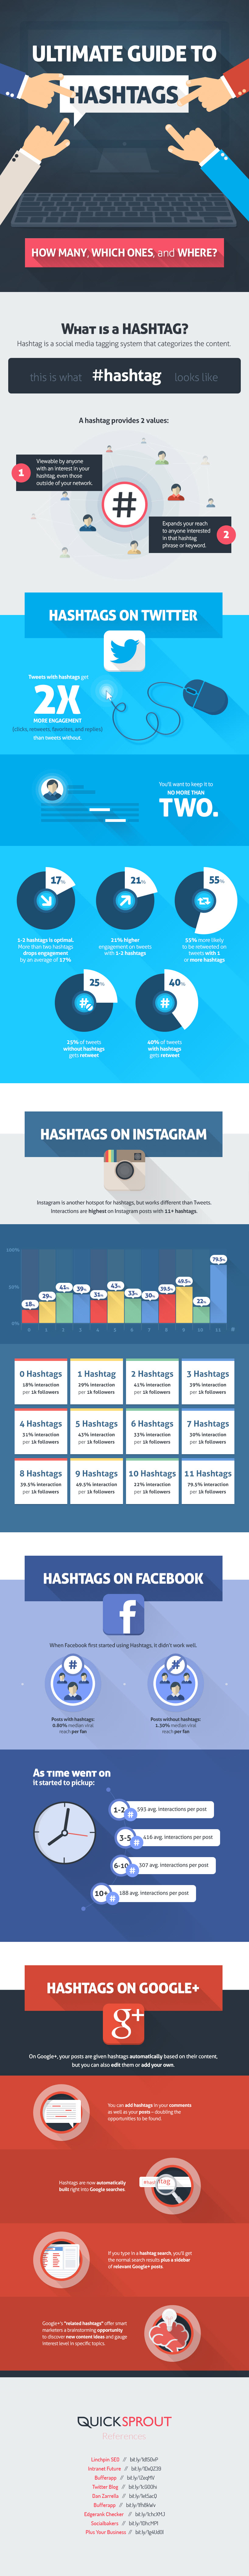 ultimate guide to social media hashtags infographic